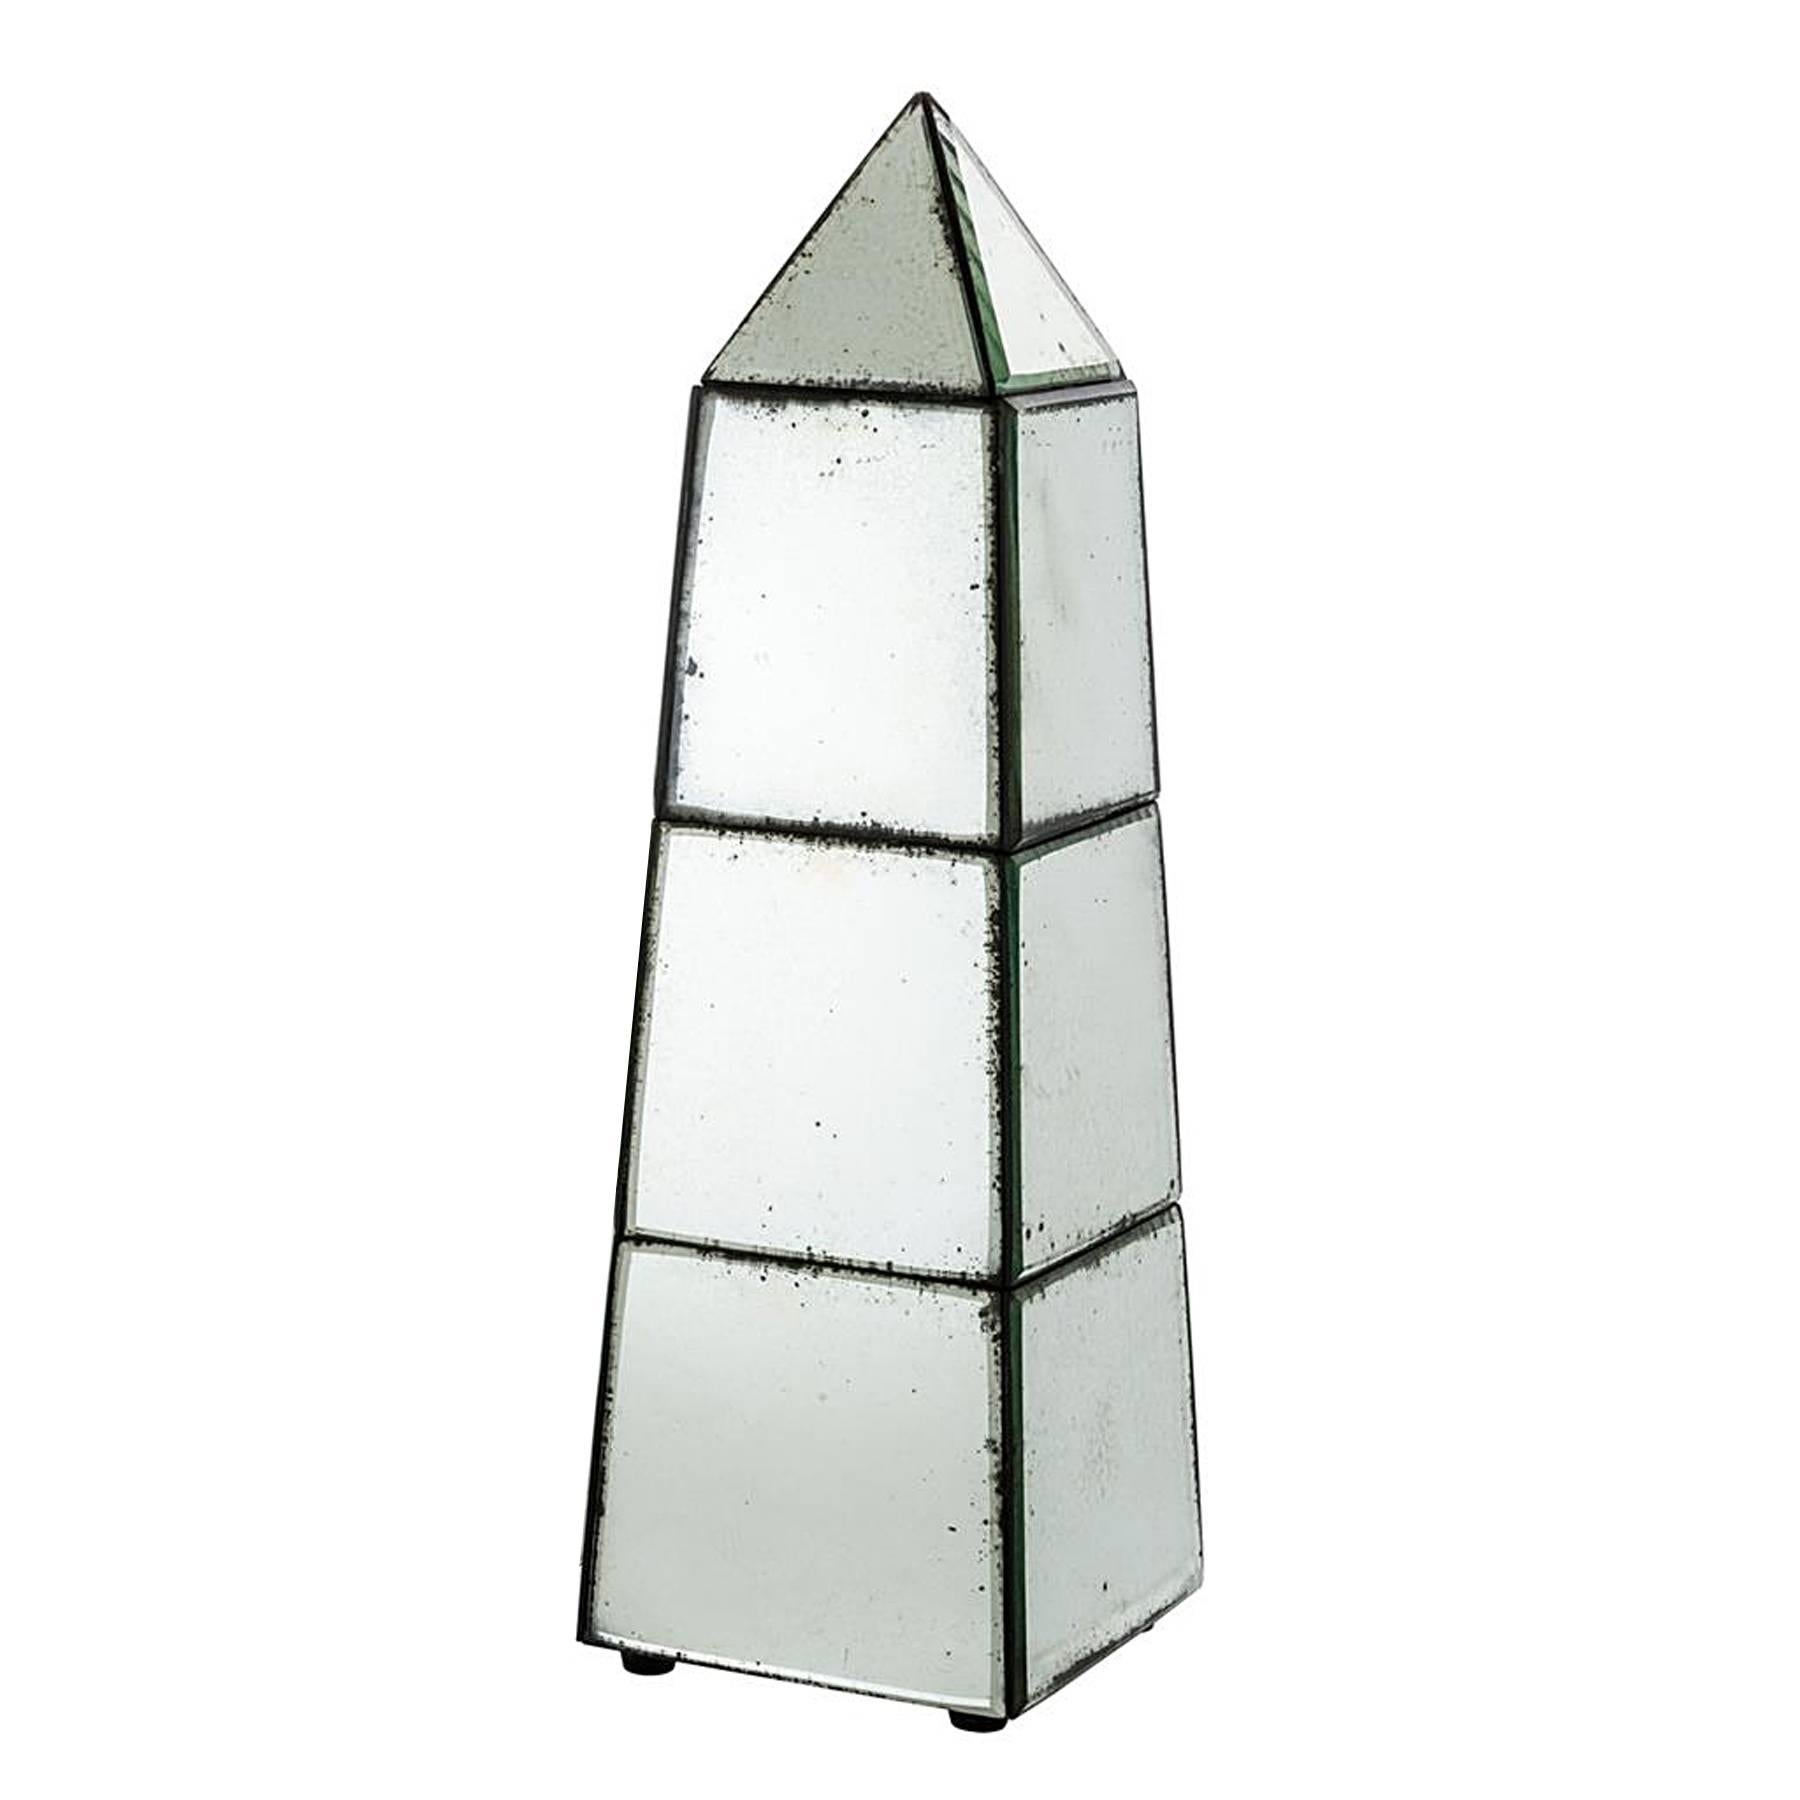 Set of two obelisk Cairo in
mirror glass antique finish.
Set of two: 450,00€
